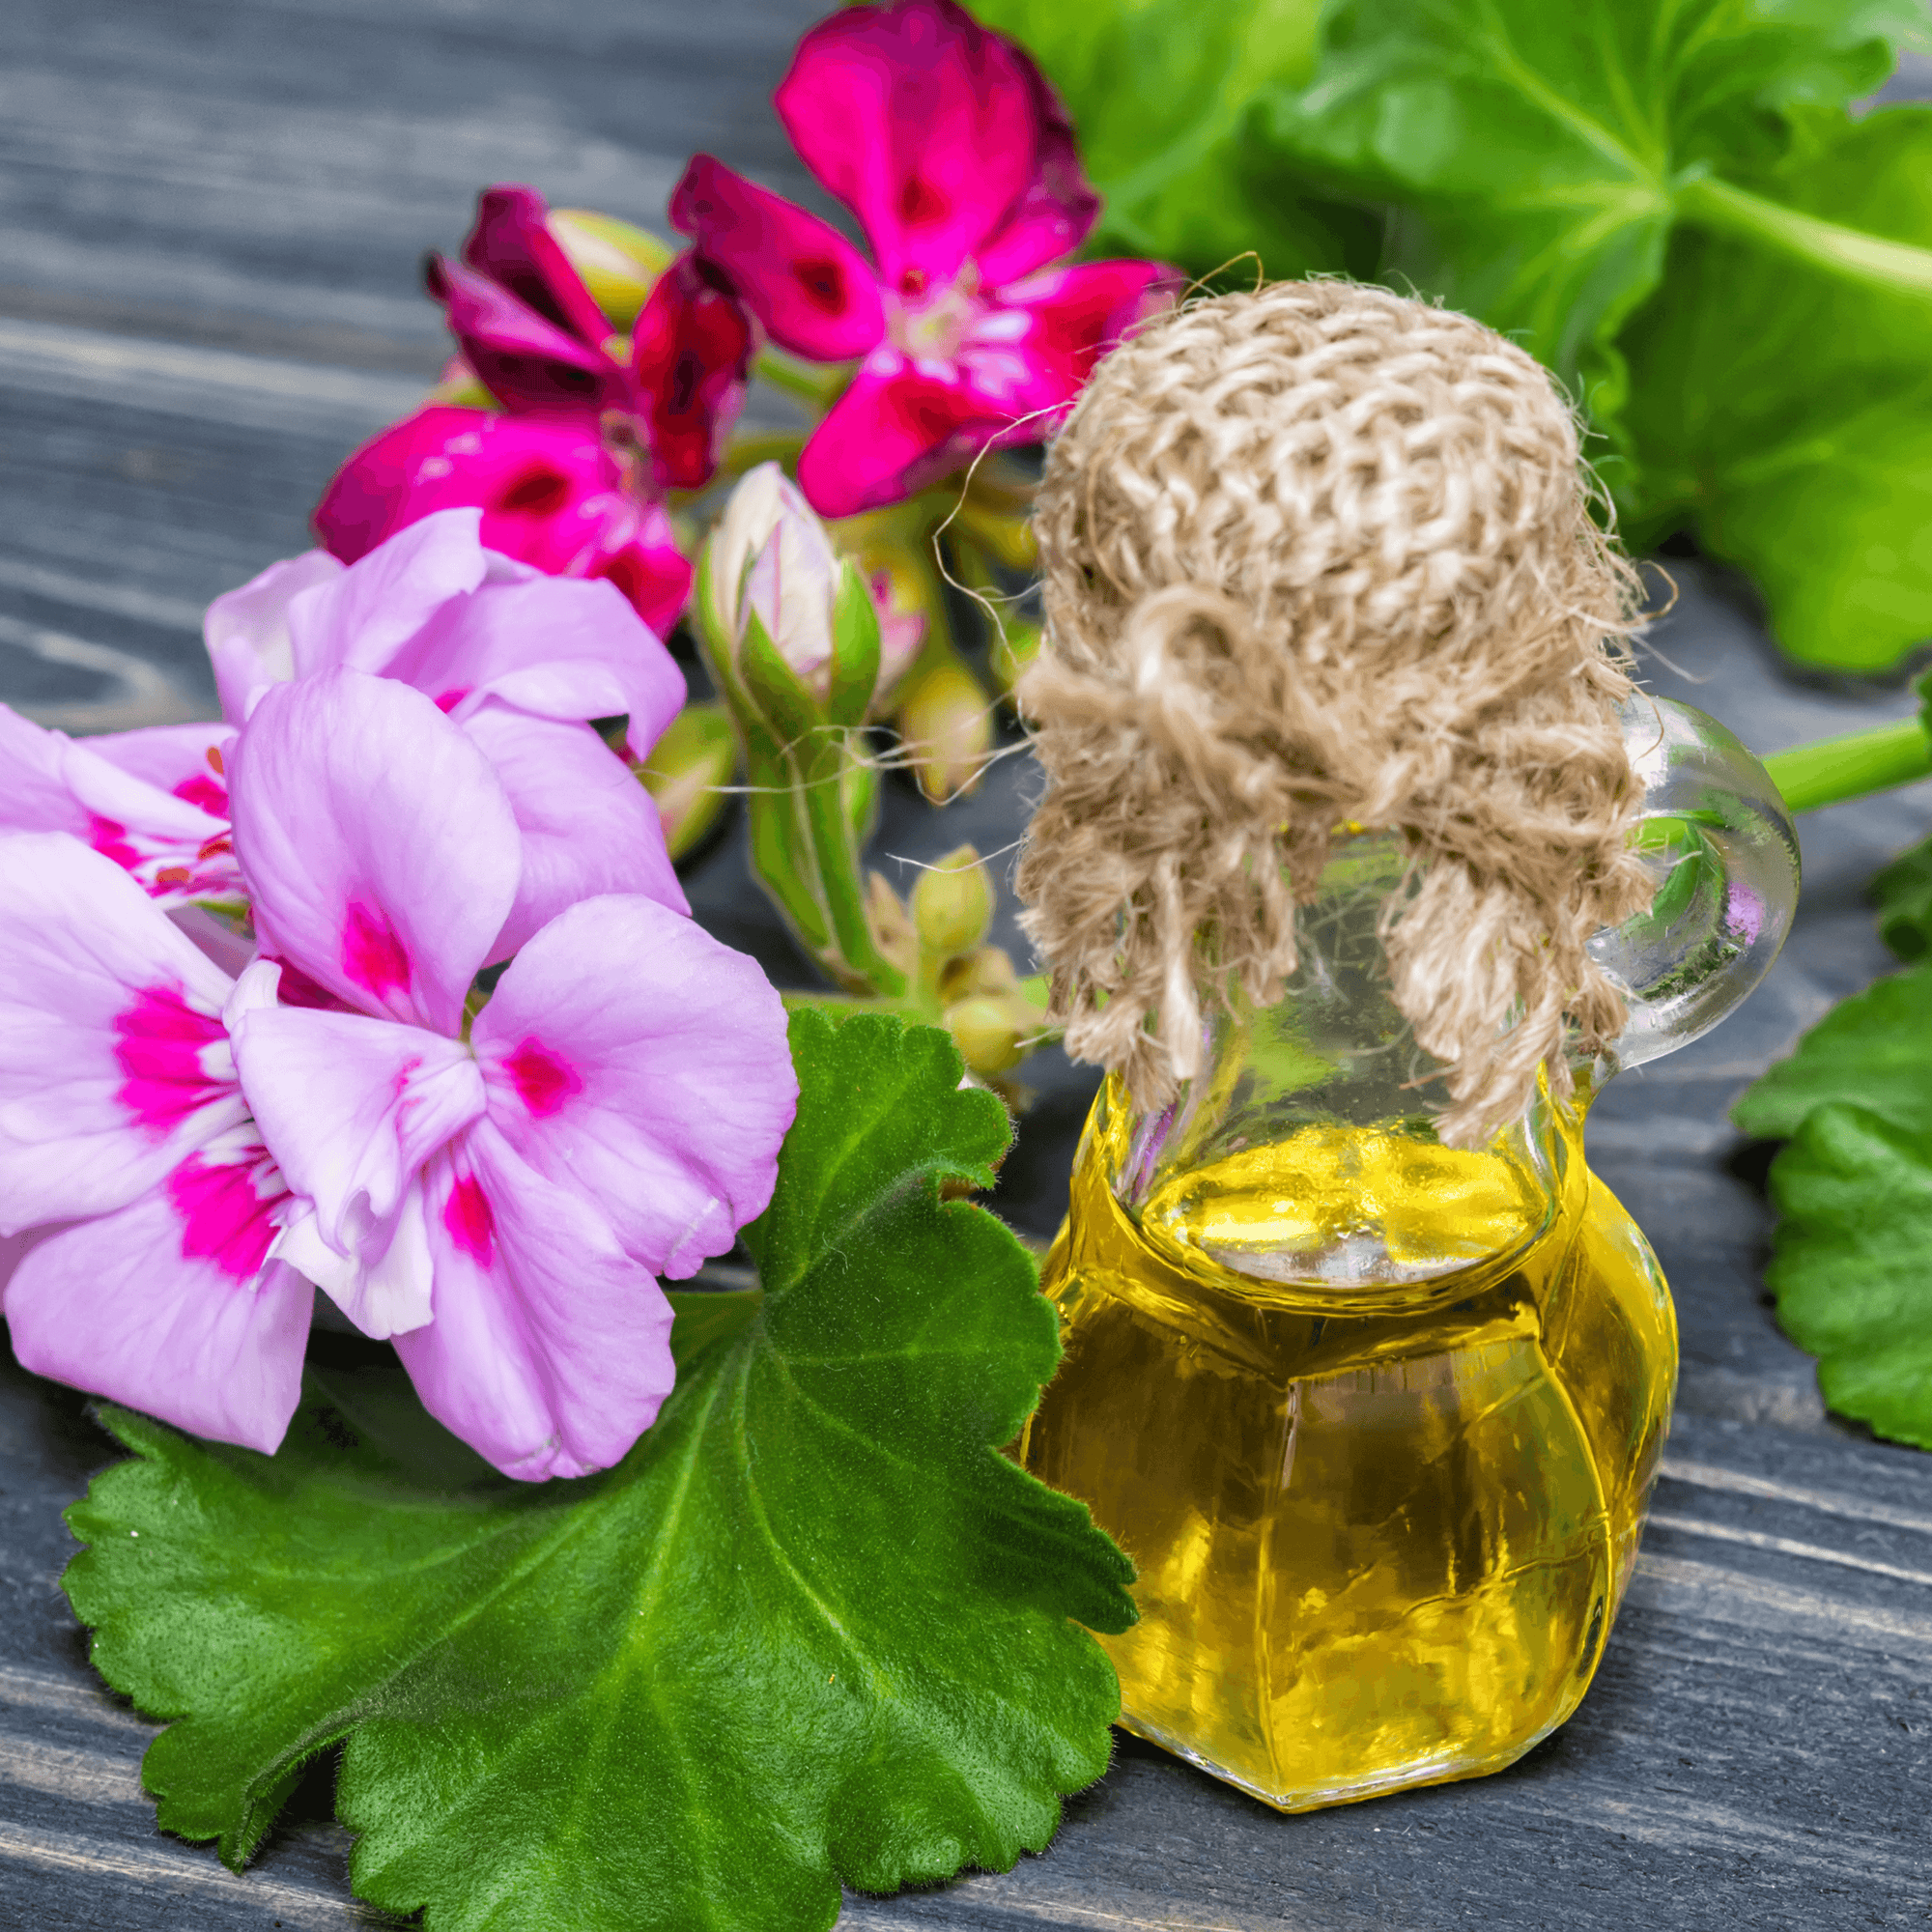 Be Bohemian Botanical Sea Serum Geranium Essential Oil. Bright purple and pink, and purple with pink geranium flowers sit on top of green leaves next to an ornate clear bottle of geranium essential oil.